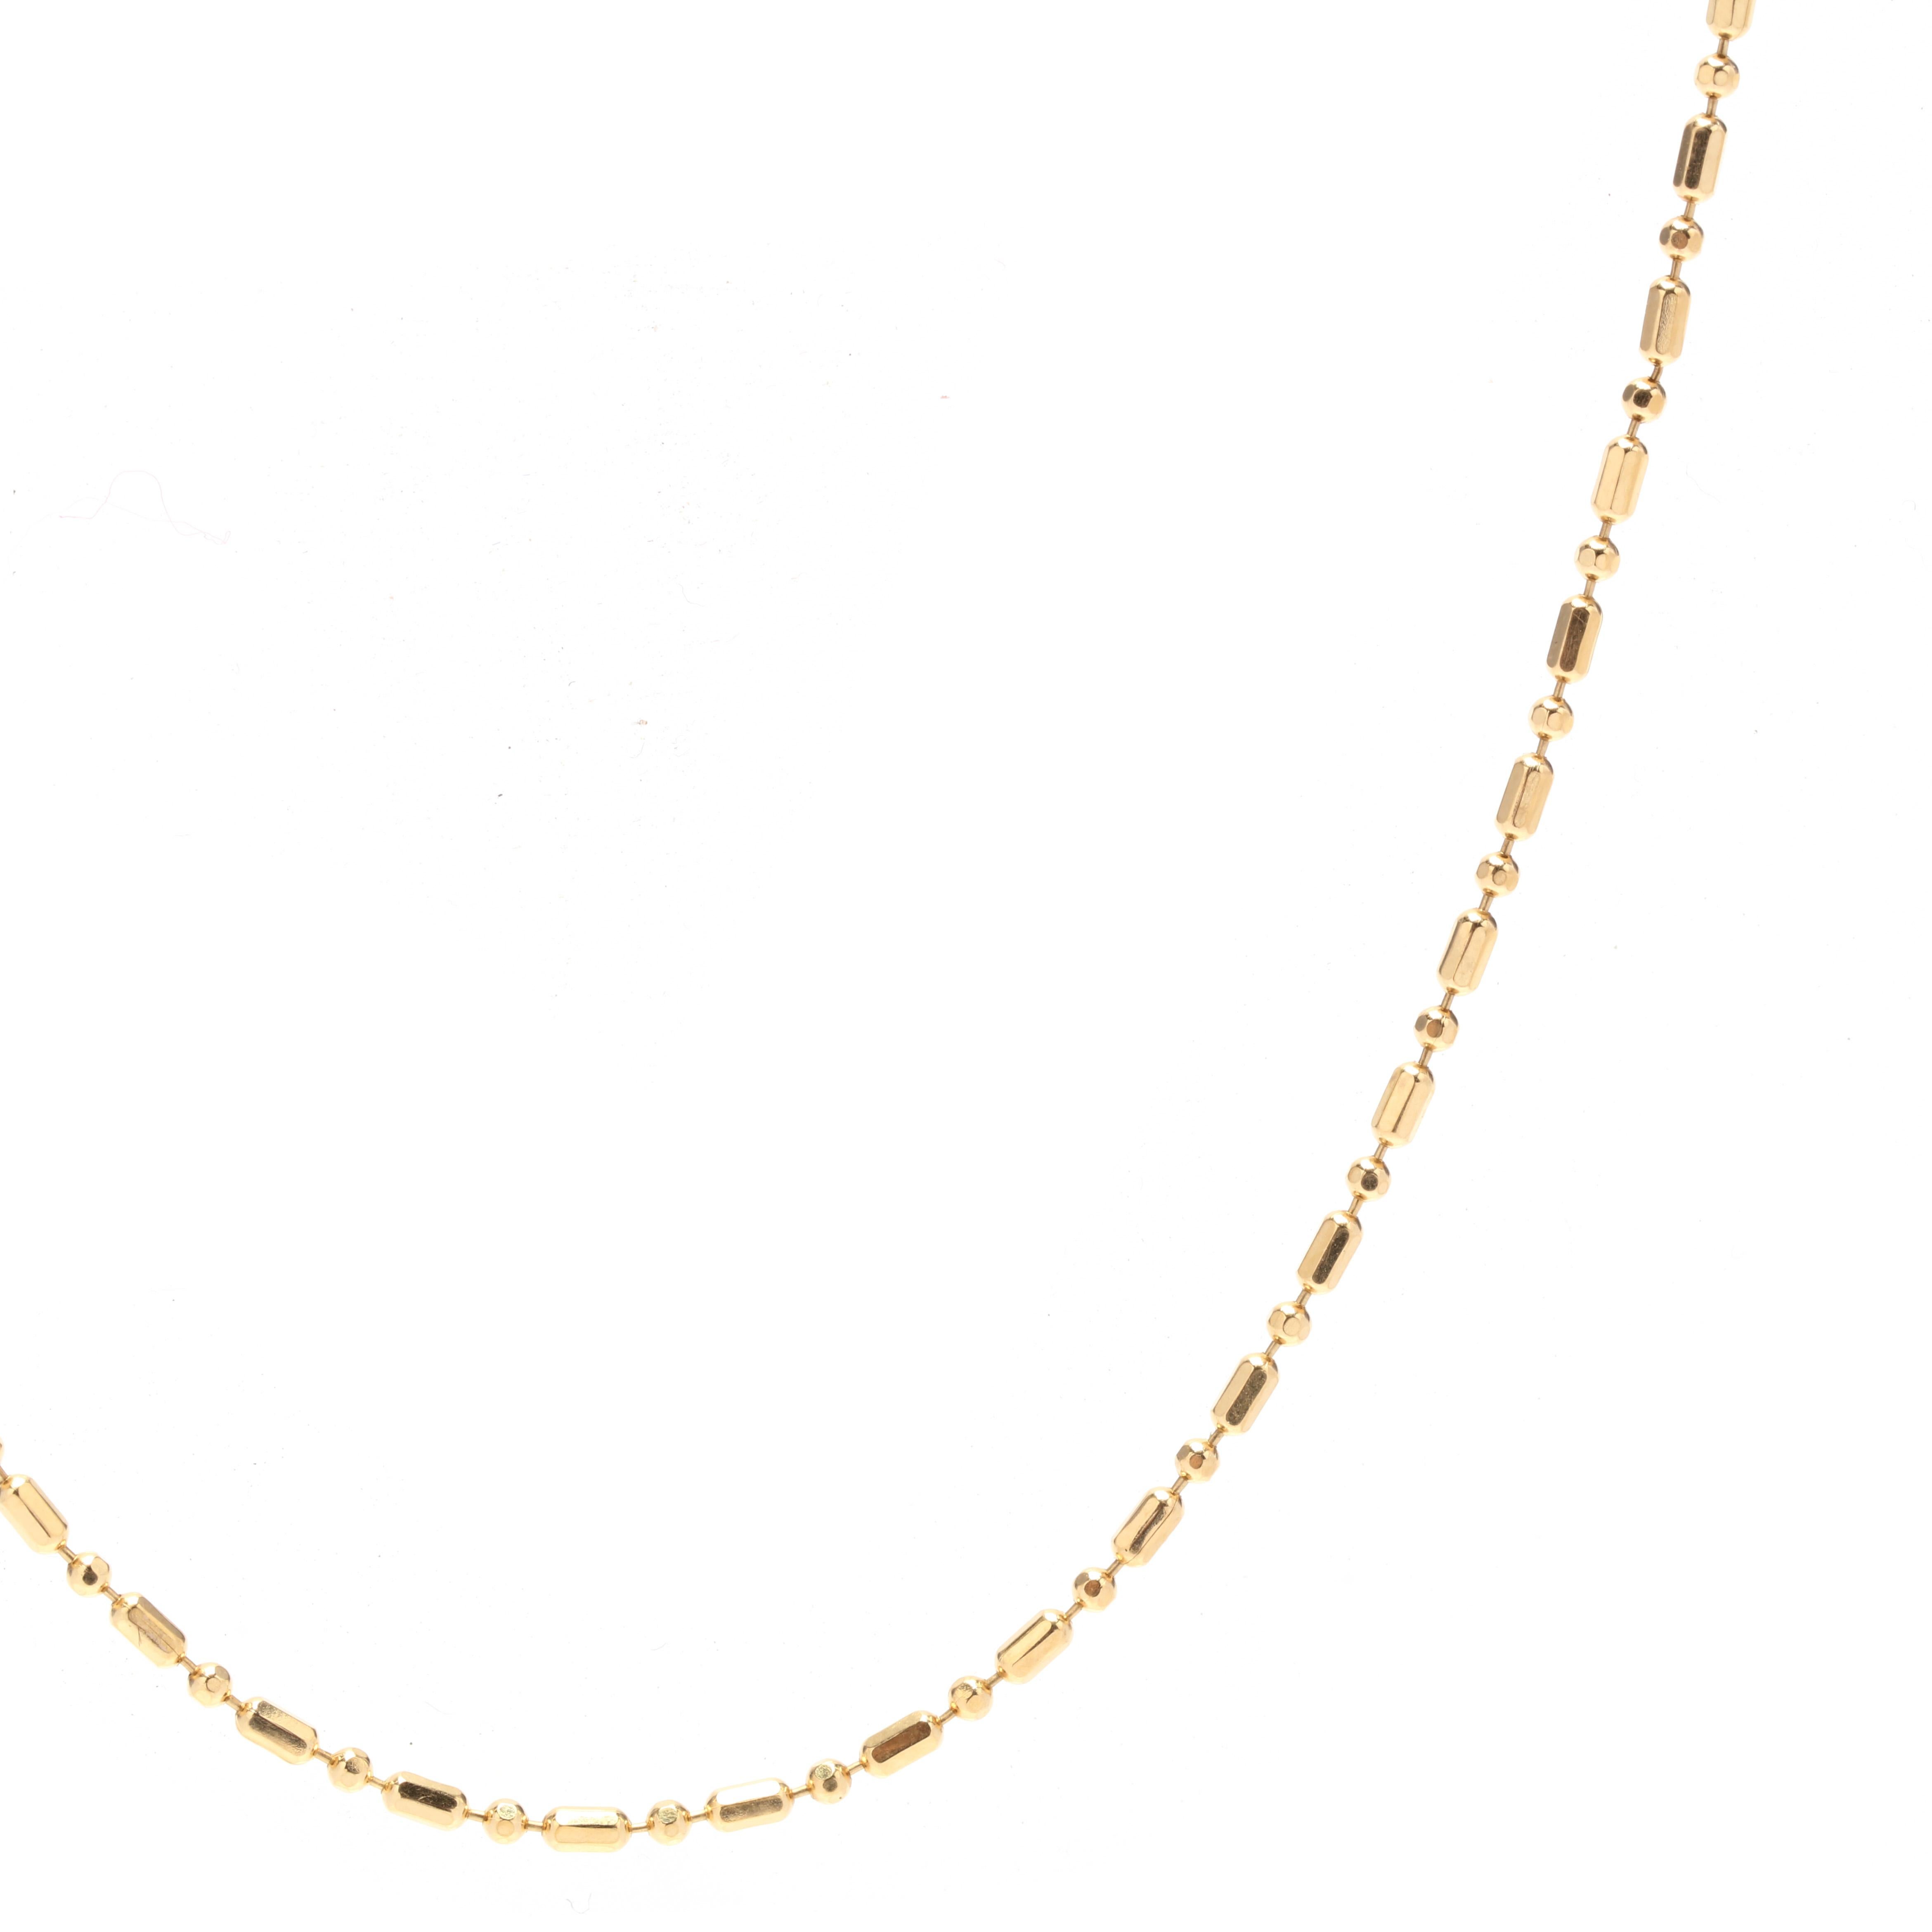 A vintage 18 karat yellow Italian gold bead chain. This thin pendant chain features oblong and round beads with a spring ring clasp.

Length: 18 in.

Width: 1.2 mm

Weight: 1.8 dwts. / 2.8 grams

Stamps: 18K ITALY

Ring Sizings & Modifications:
* We